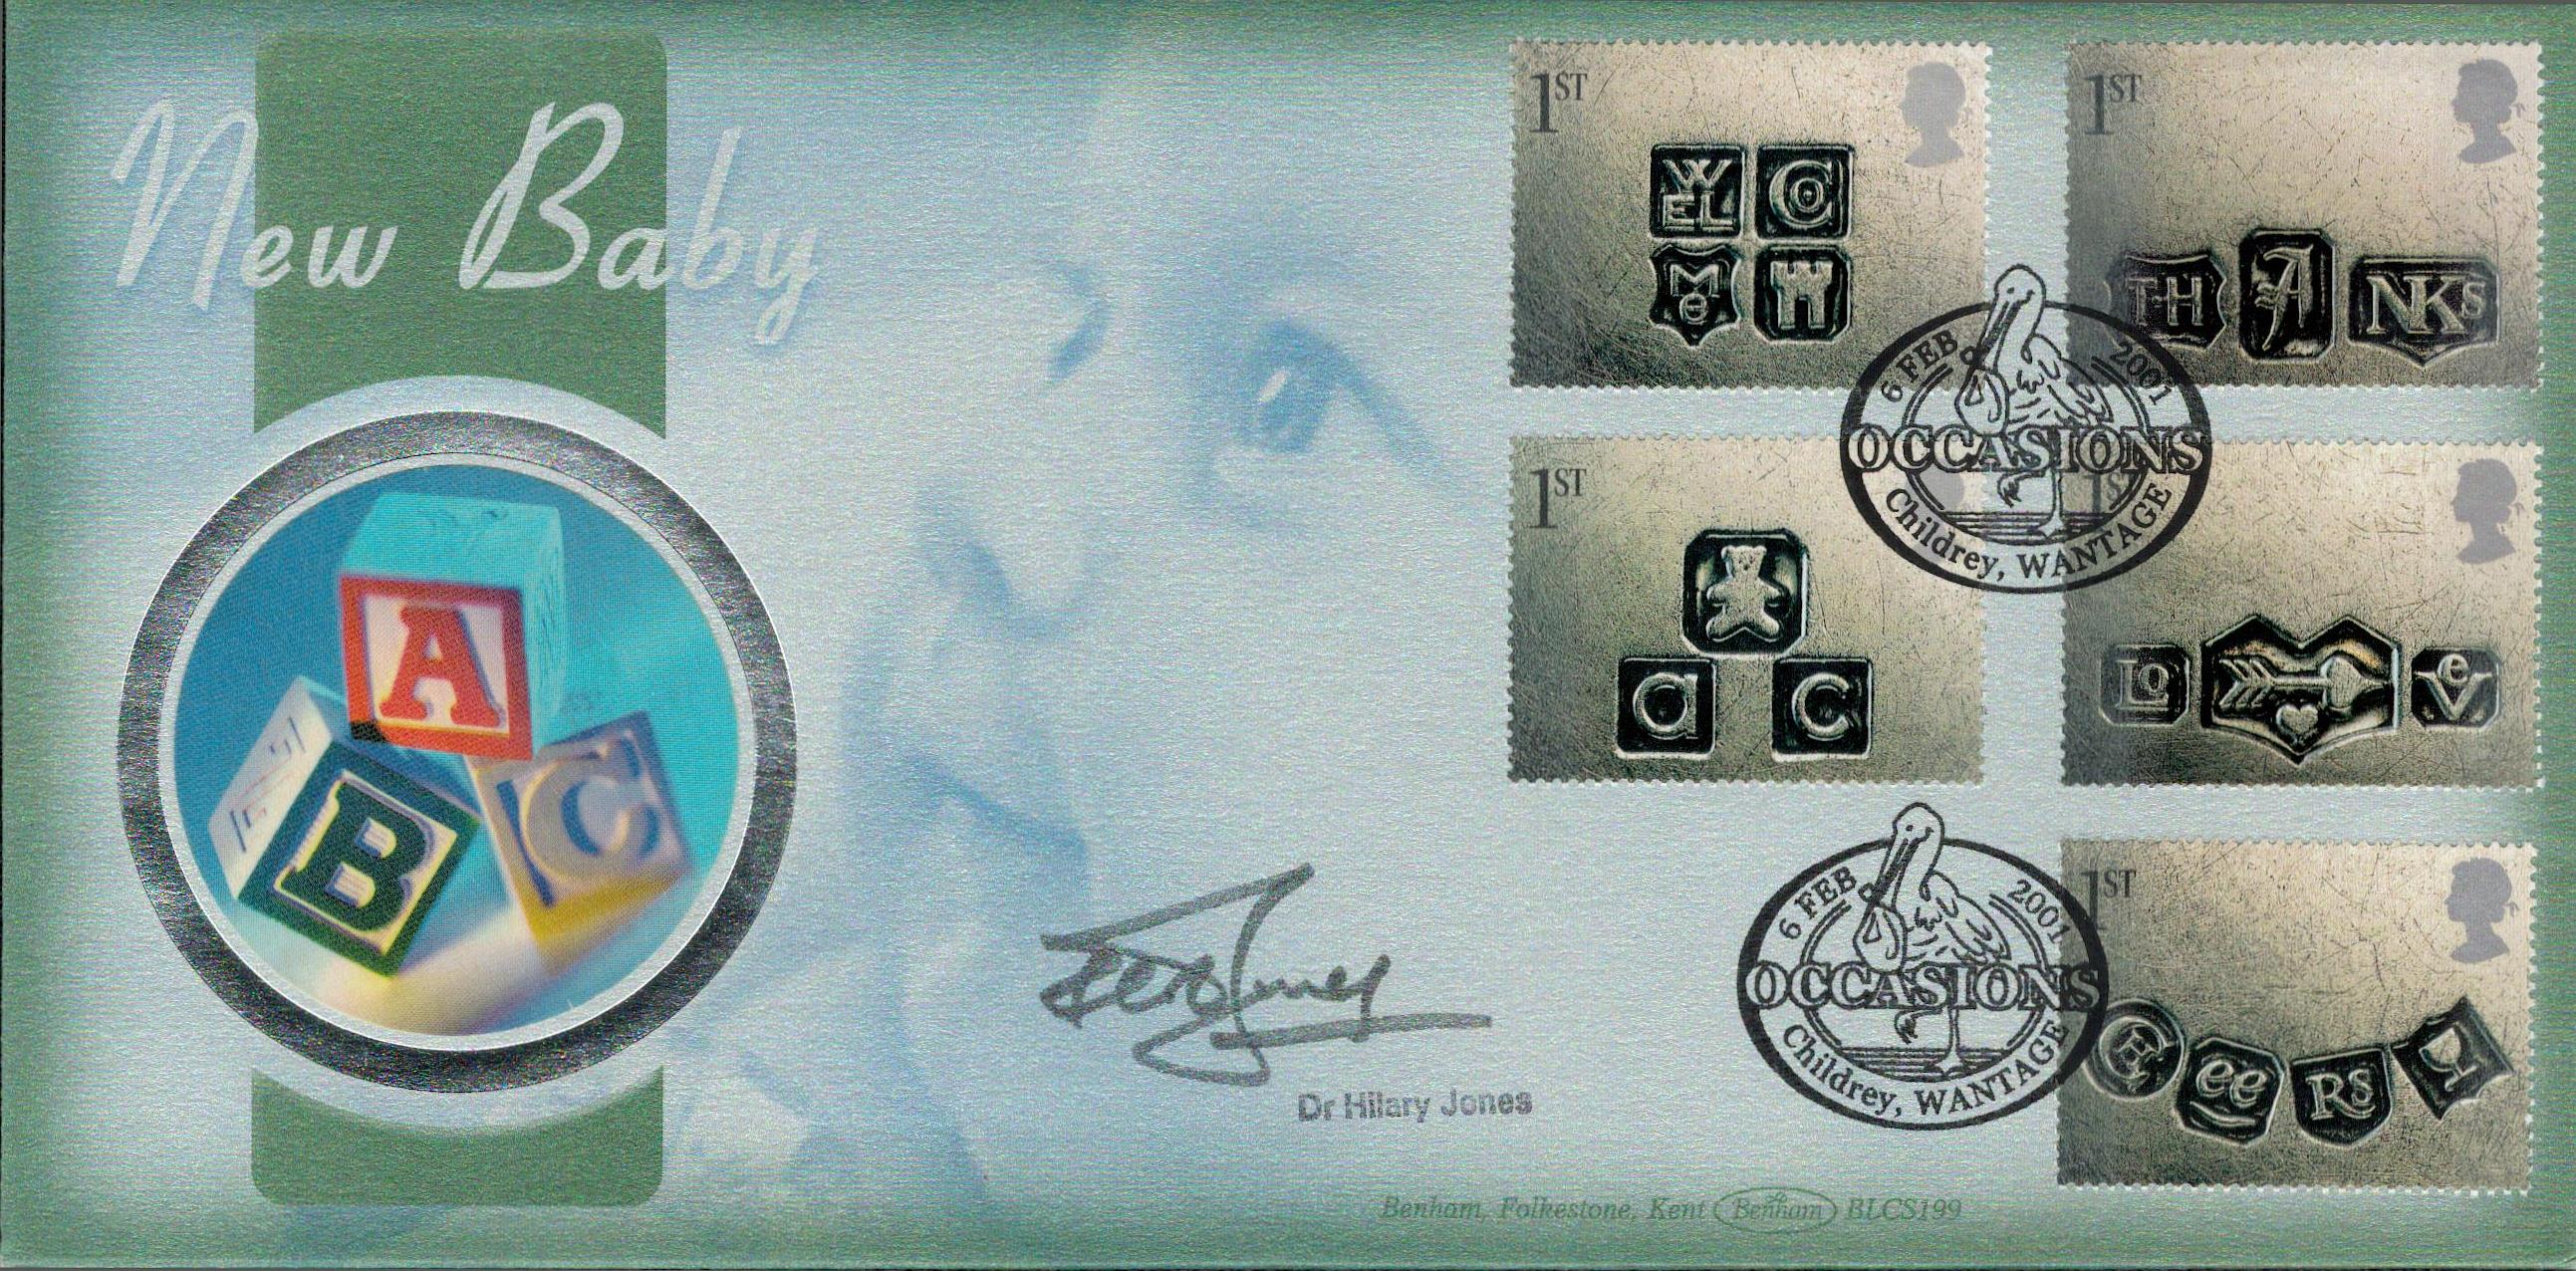 Dr Hilary Jones signed New Baby FDC. 6th February 2001 Childrey Wantage. Good Condition. All